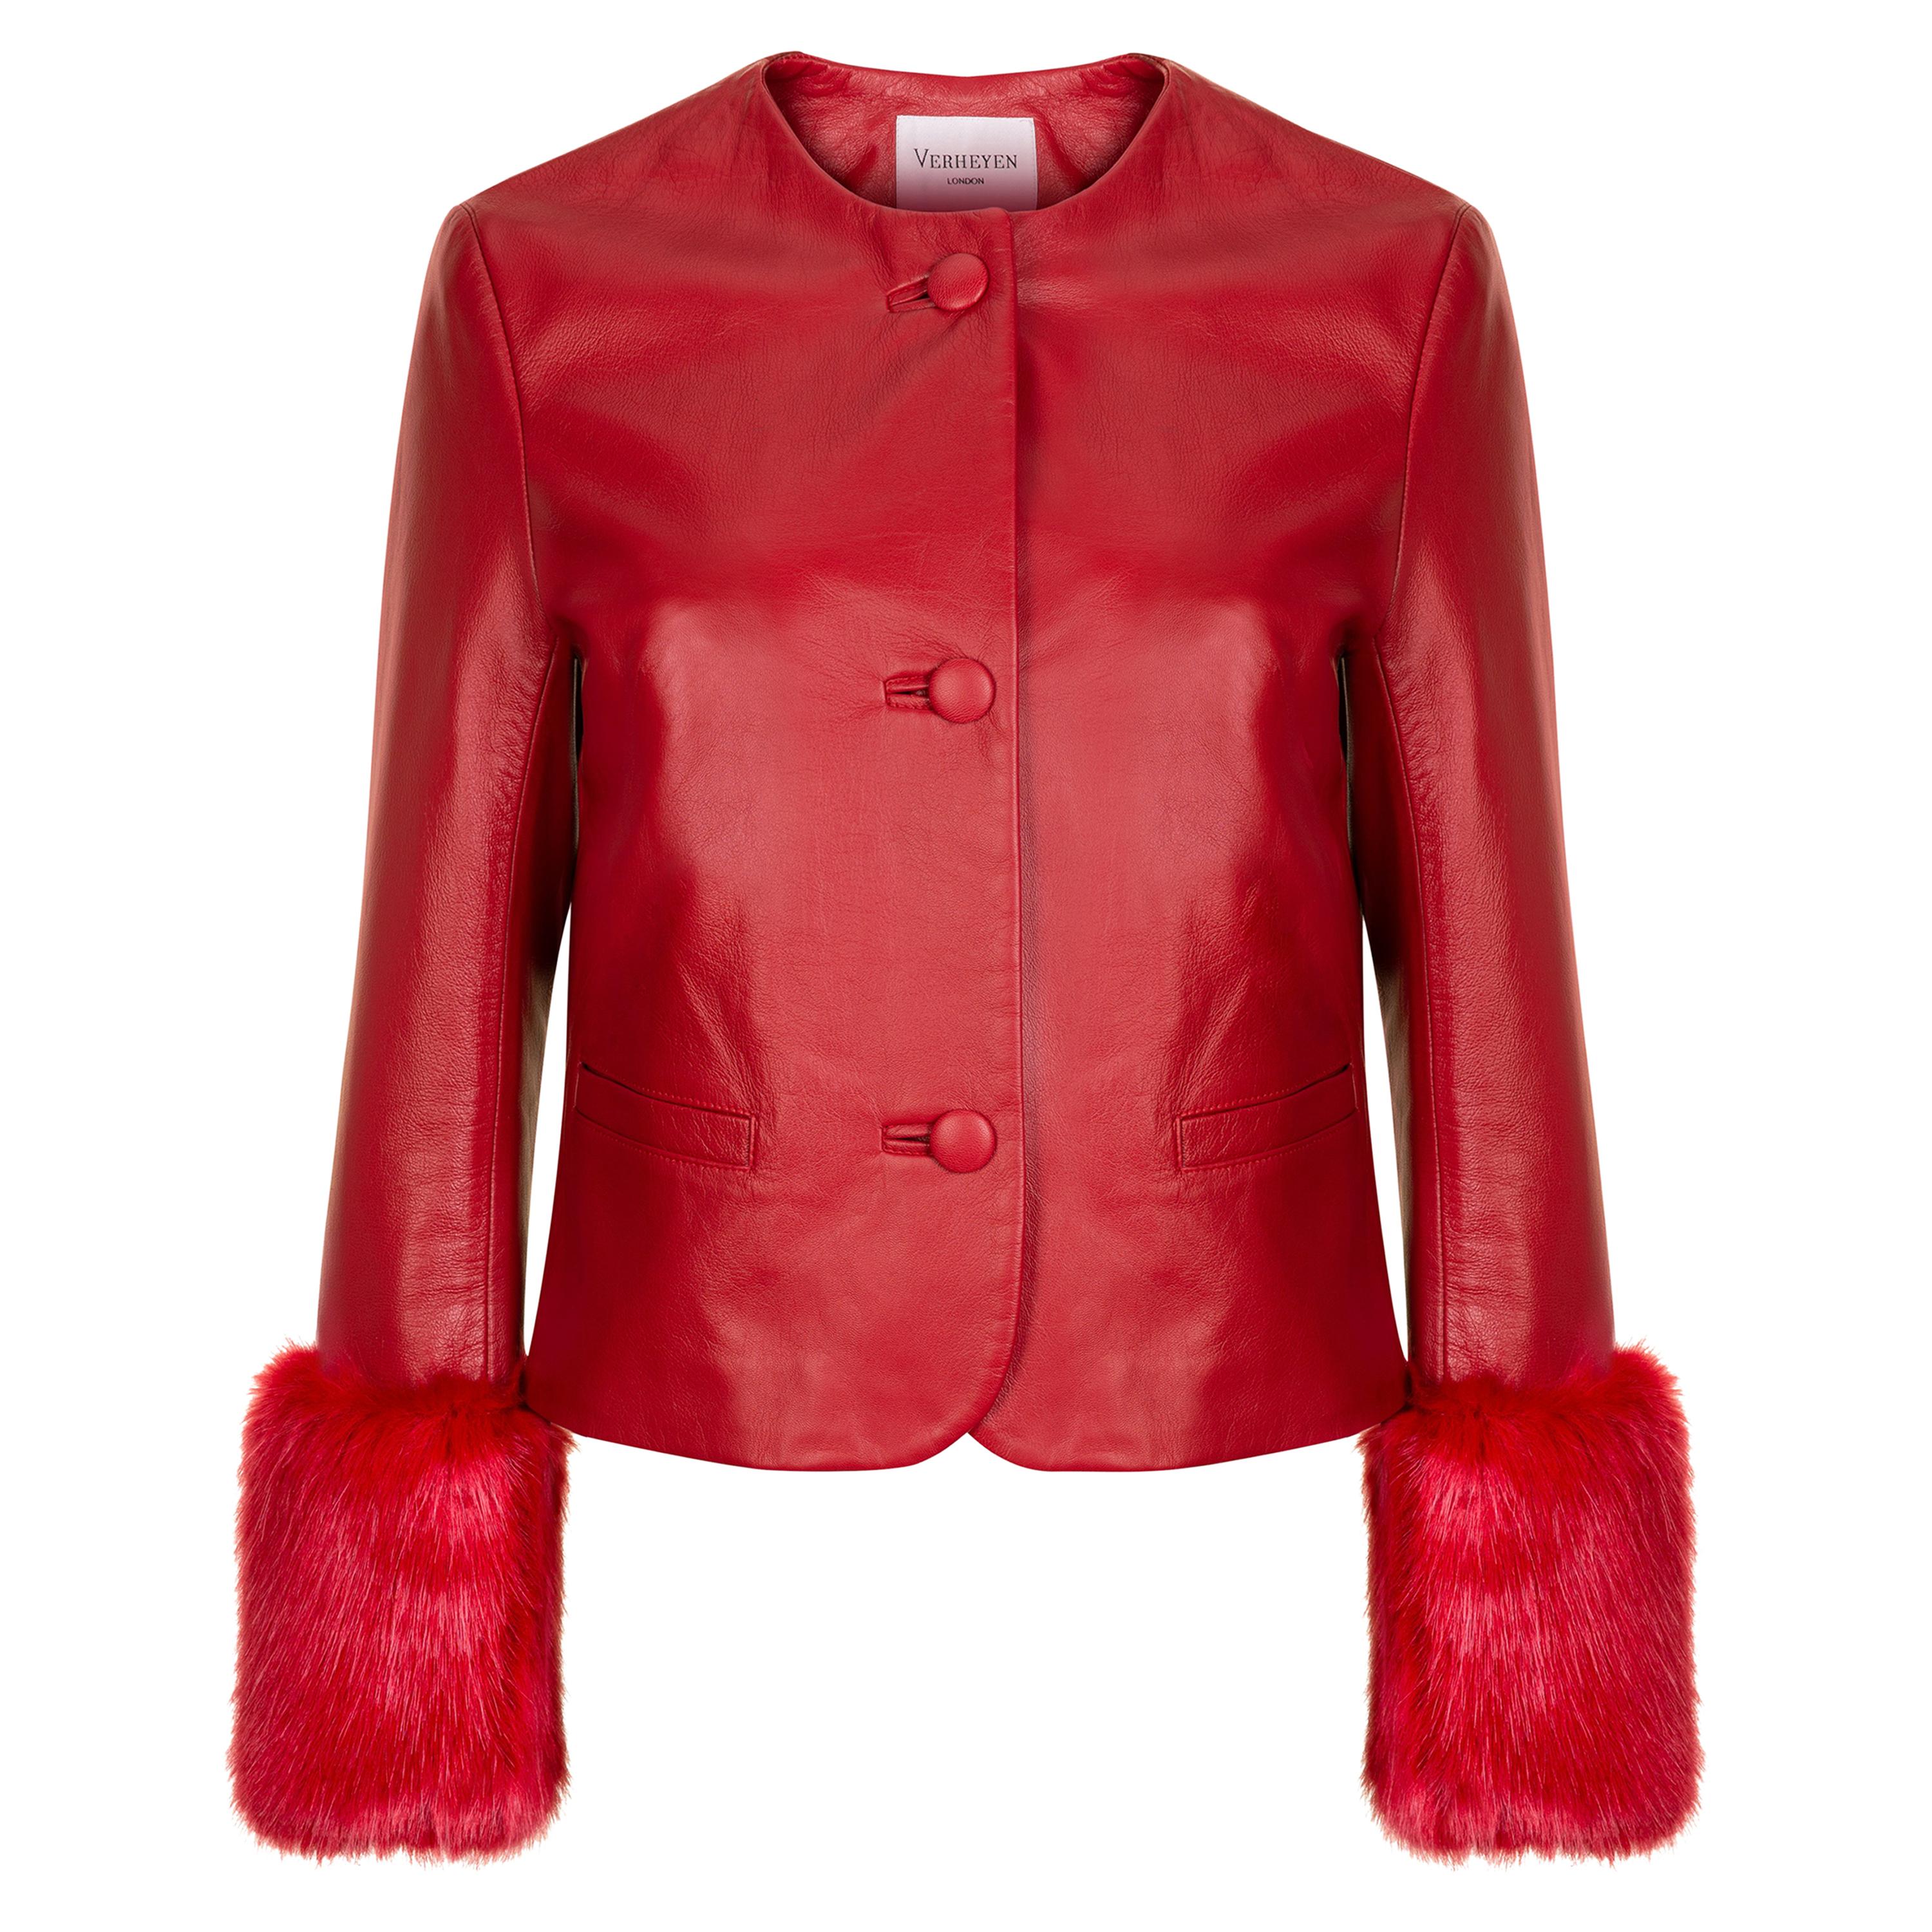 Verheyen Vita Cropped Jacket in Red Leather with Faux Fur - Size uk 10 For Sale